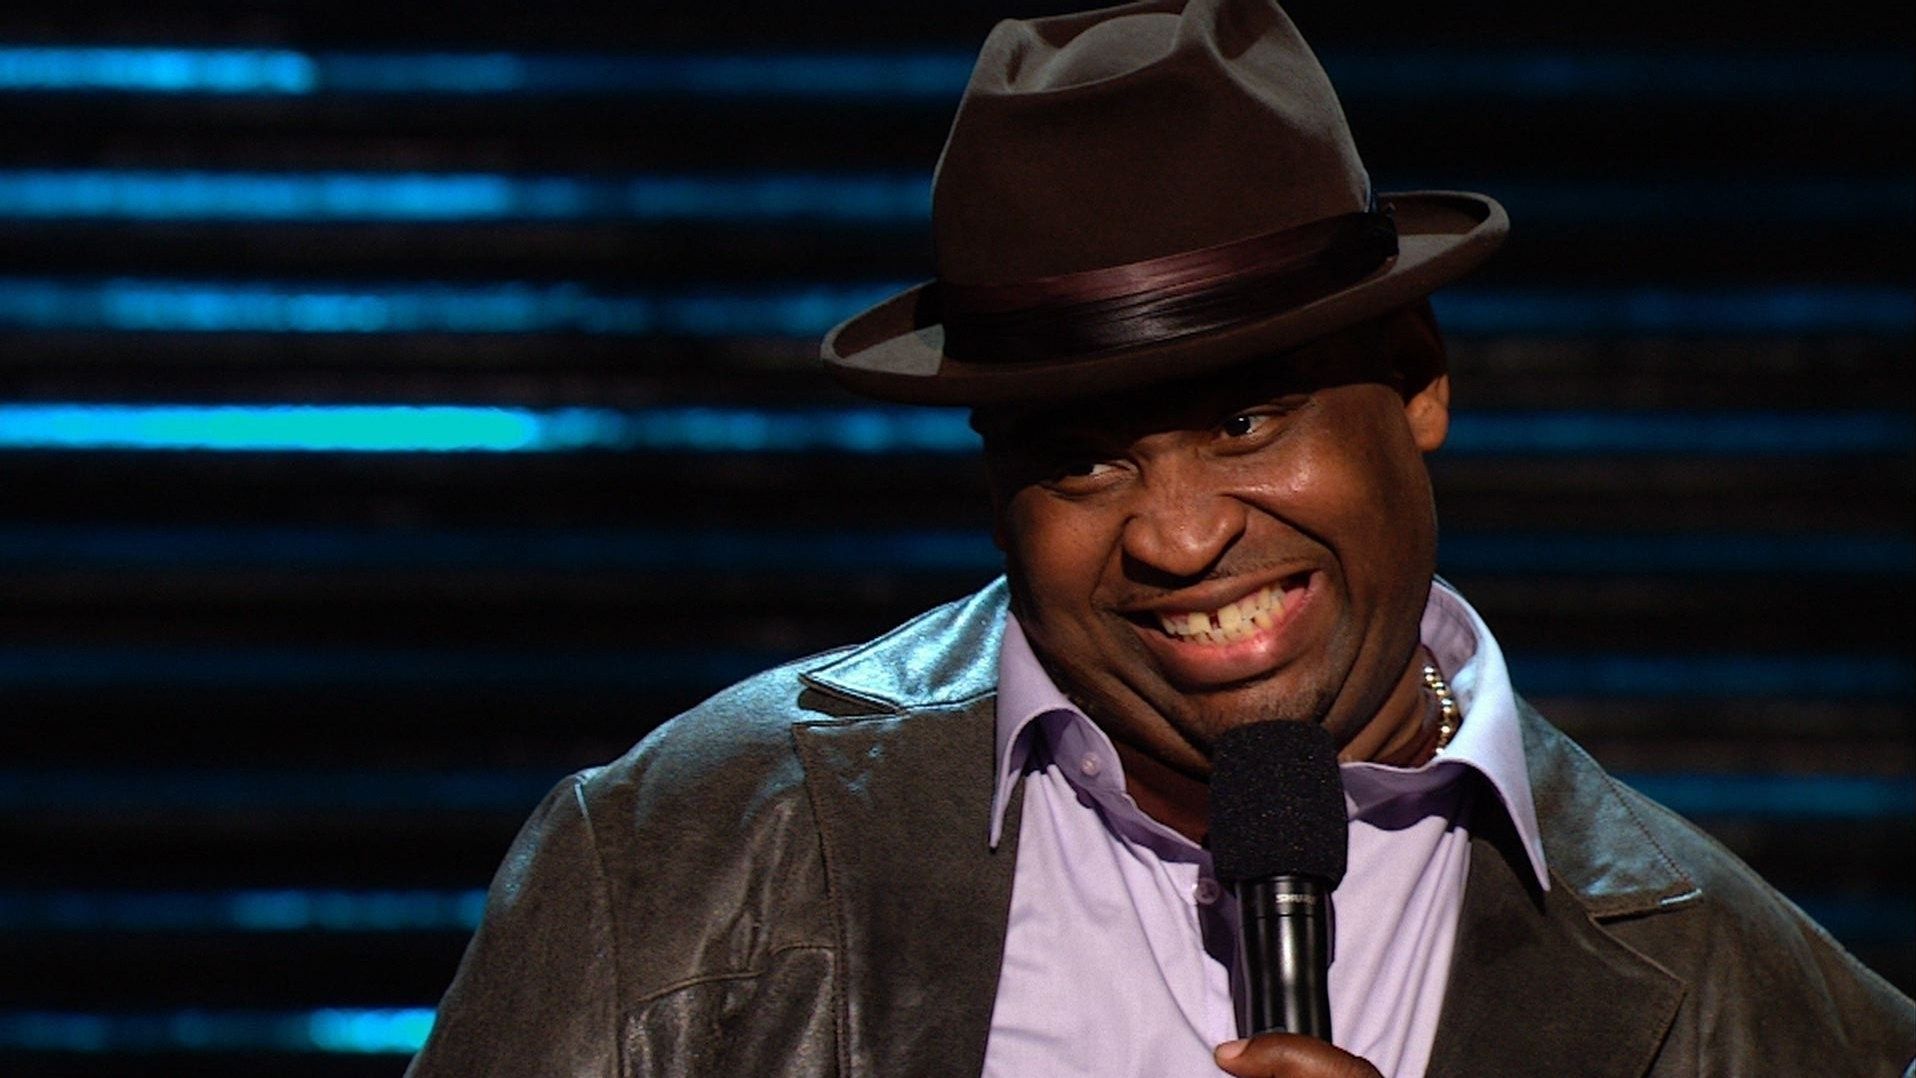 https://pyxis.nymag.com/v1/imgs/b7e/fad/c5273171c214c0a10a022628e8b4f2969c-patrice-oneal-elephant-in-the-room.jpg